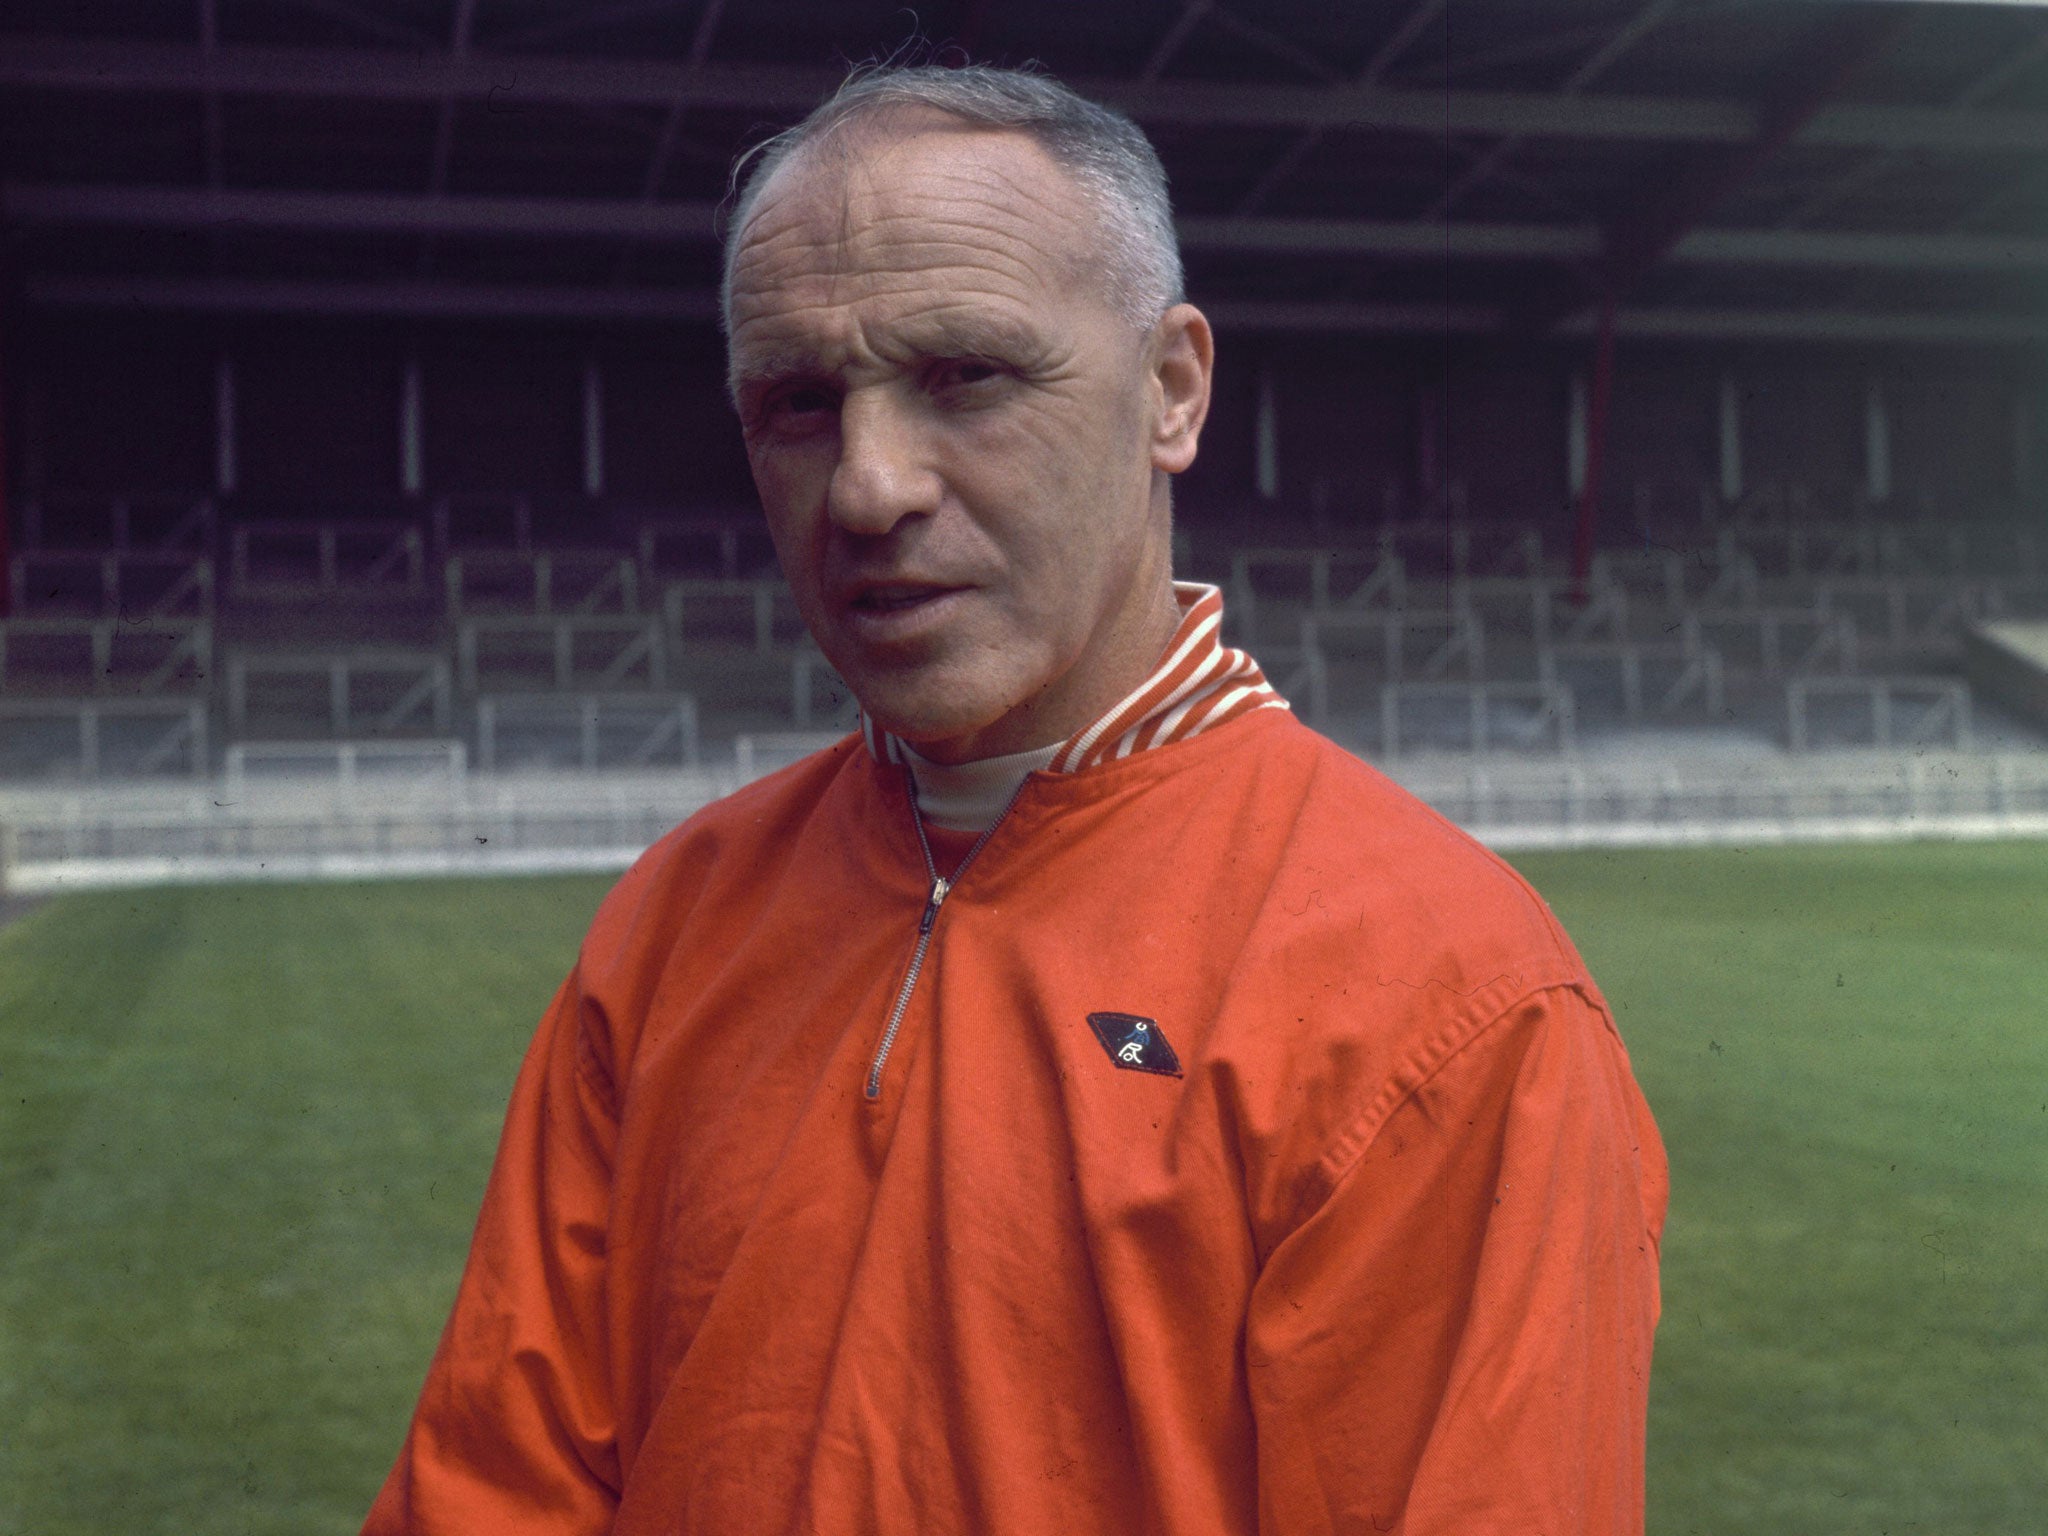 ‘Some people believe football is a matter of life and death, I am very disappointed with that attitude. I can assure you it is much, much more important than that’ – the words of Bill Shankly, seen above at Anfield in 1969